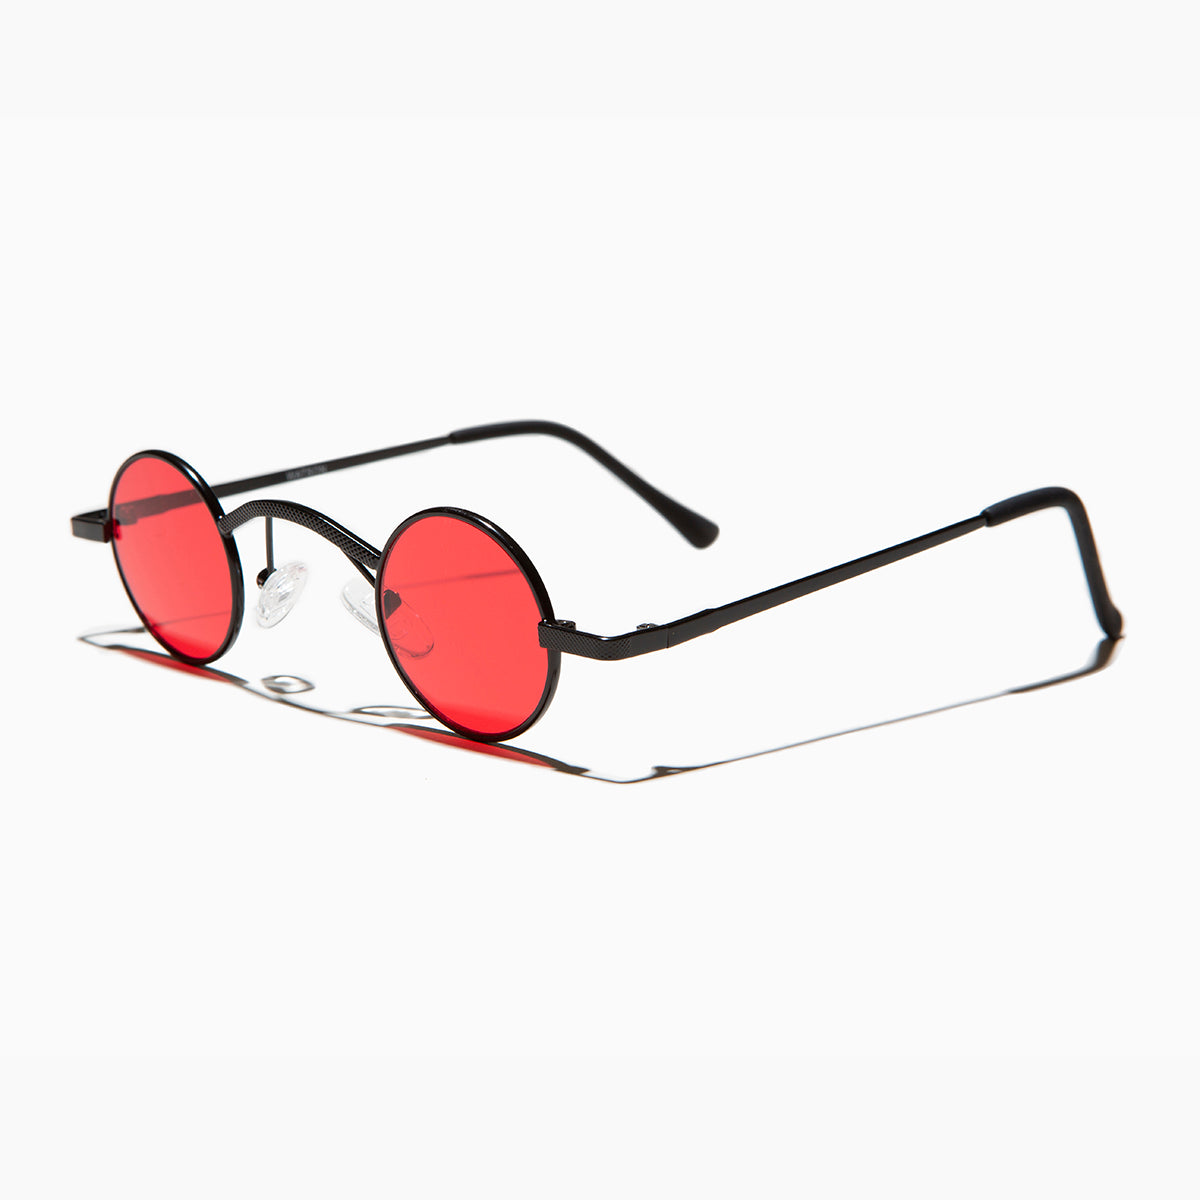 Tiny Spectacle Sunglass